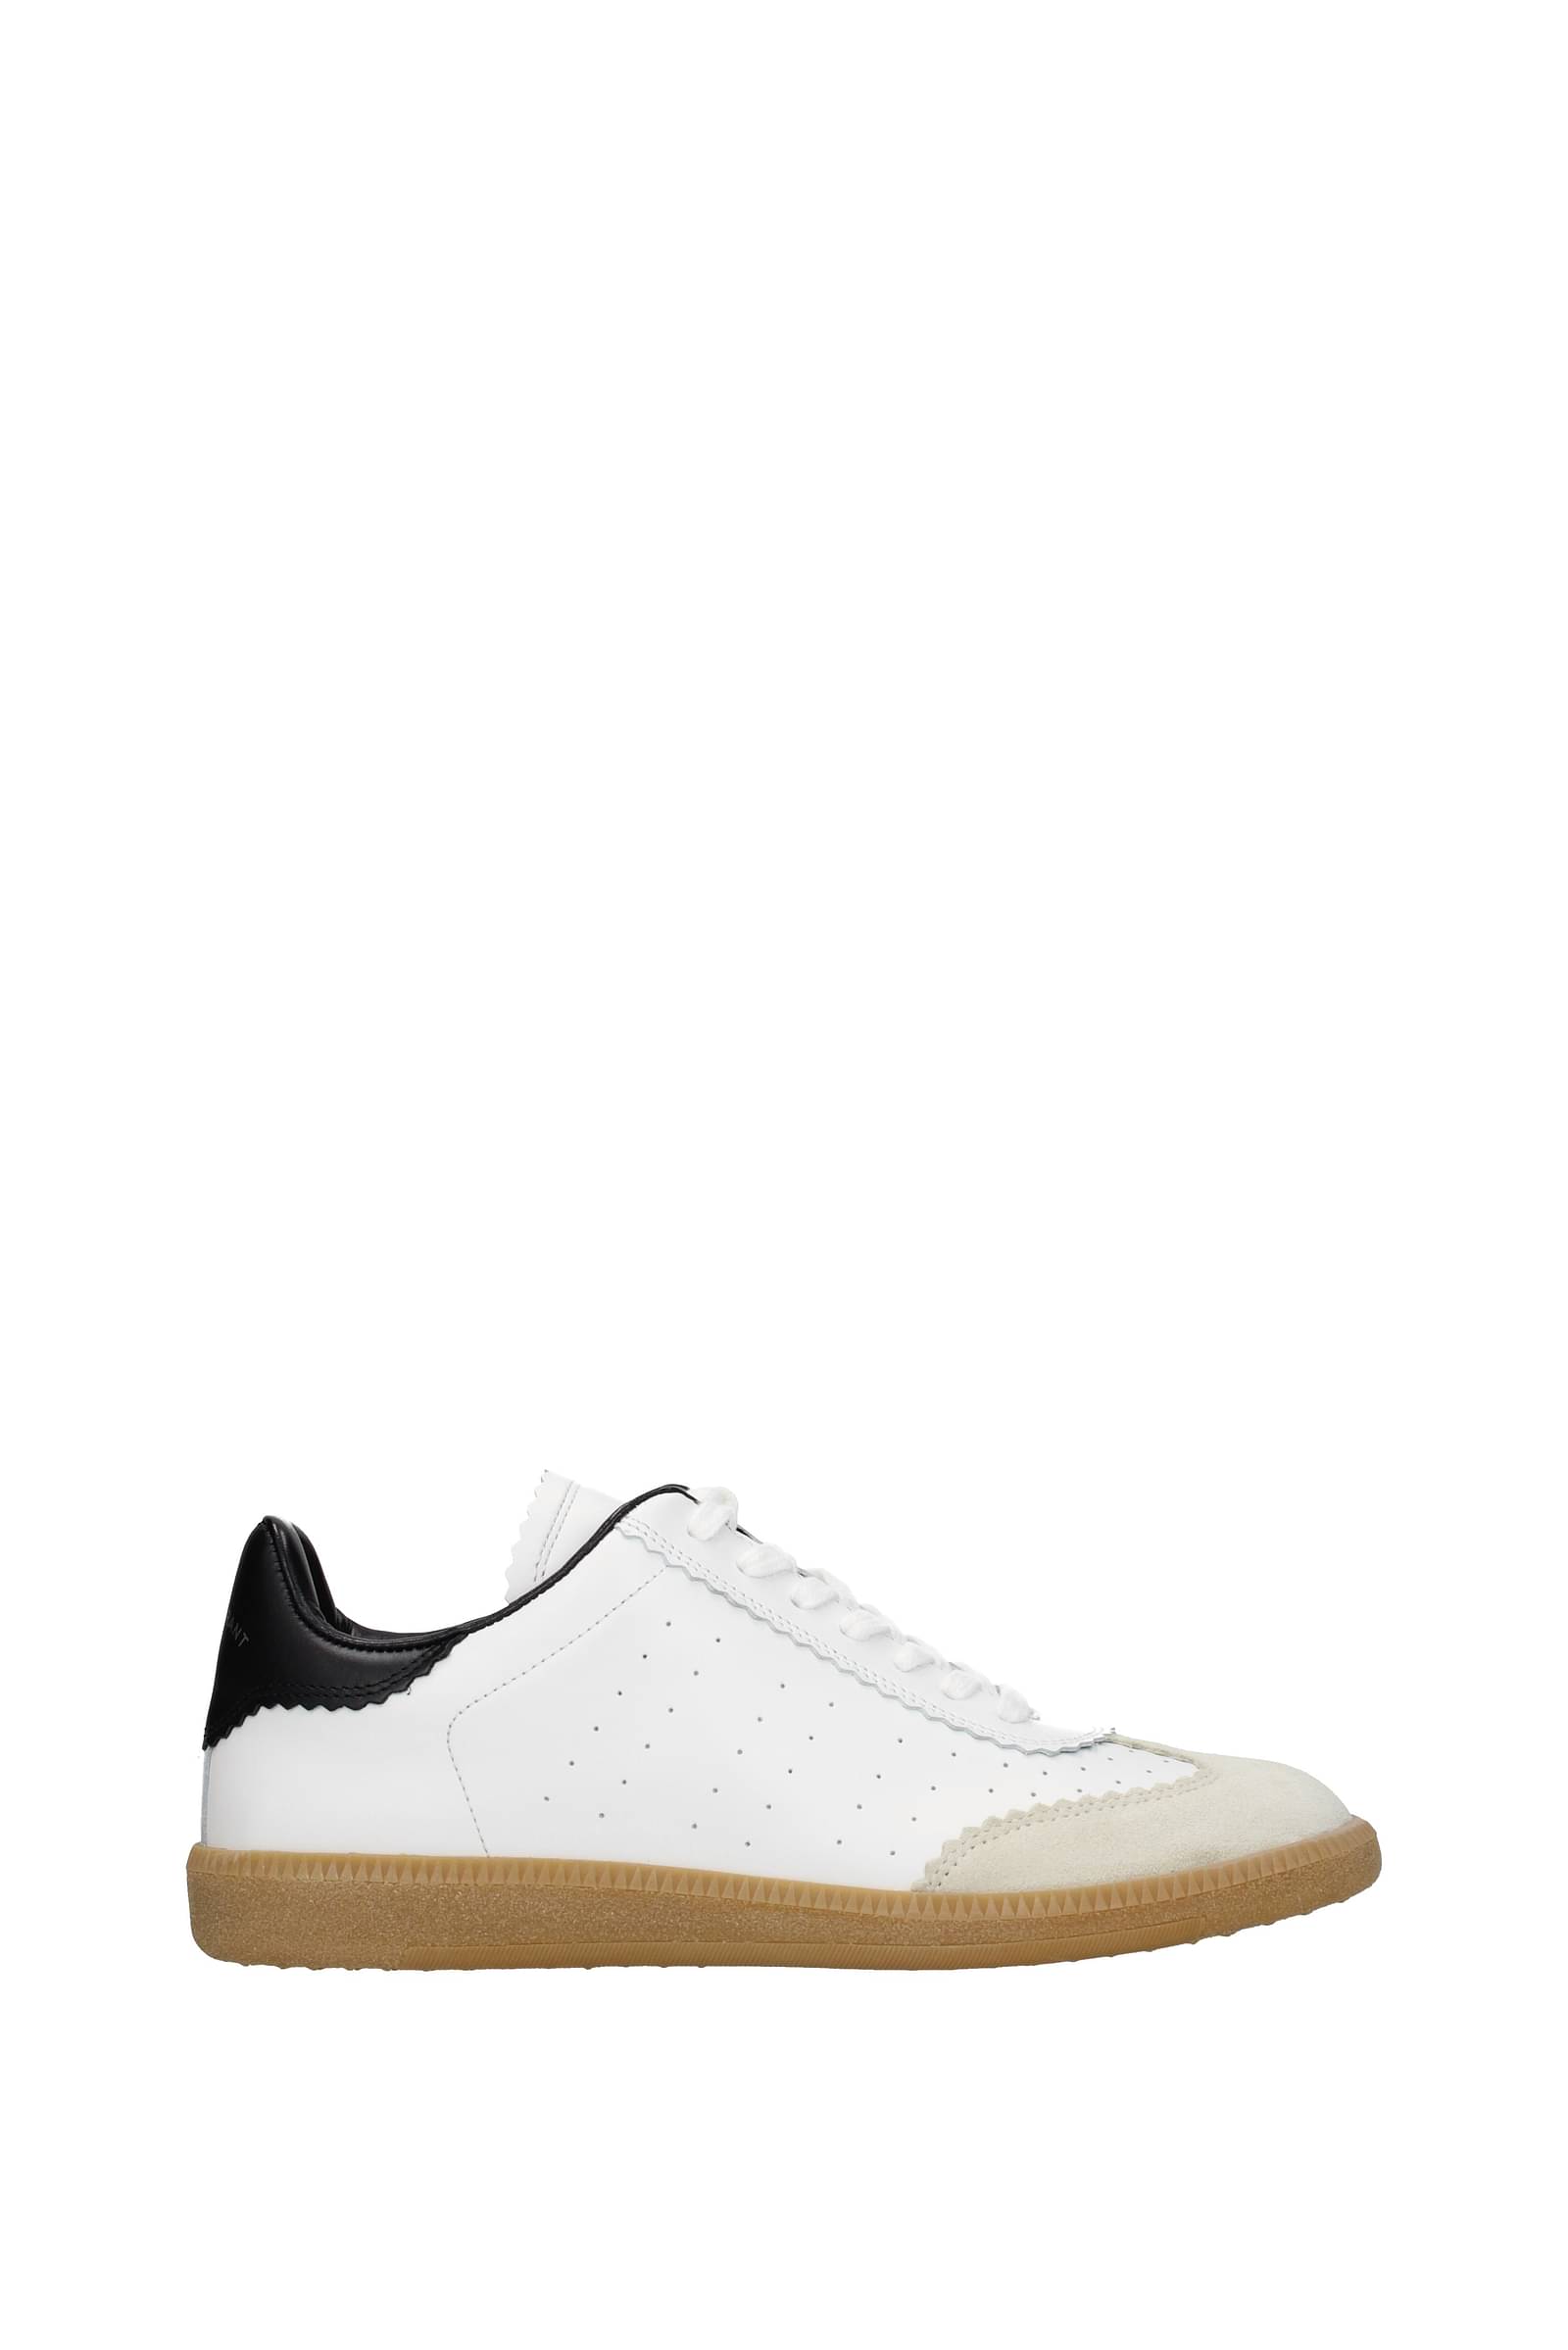 Share 118+ isabel marant white sneakers best